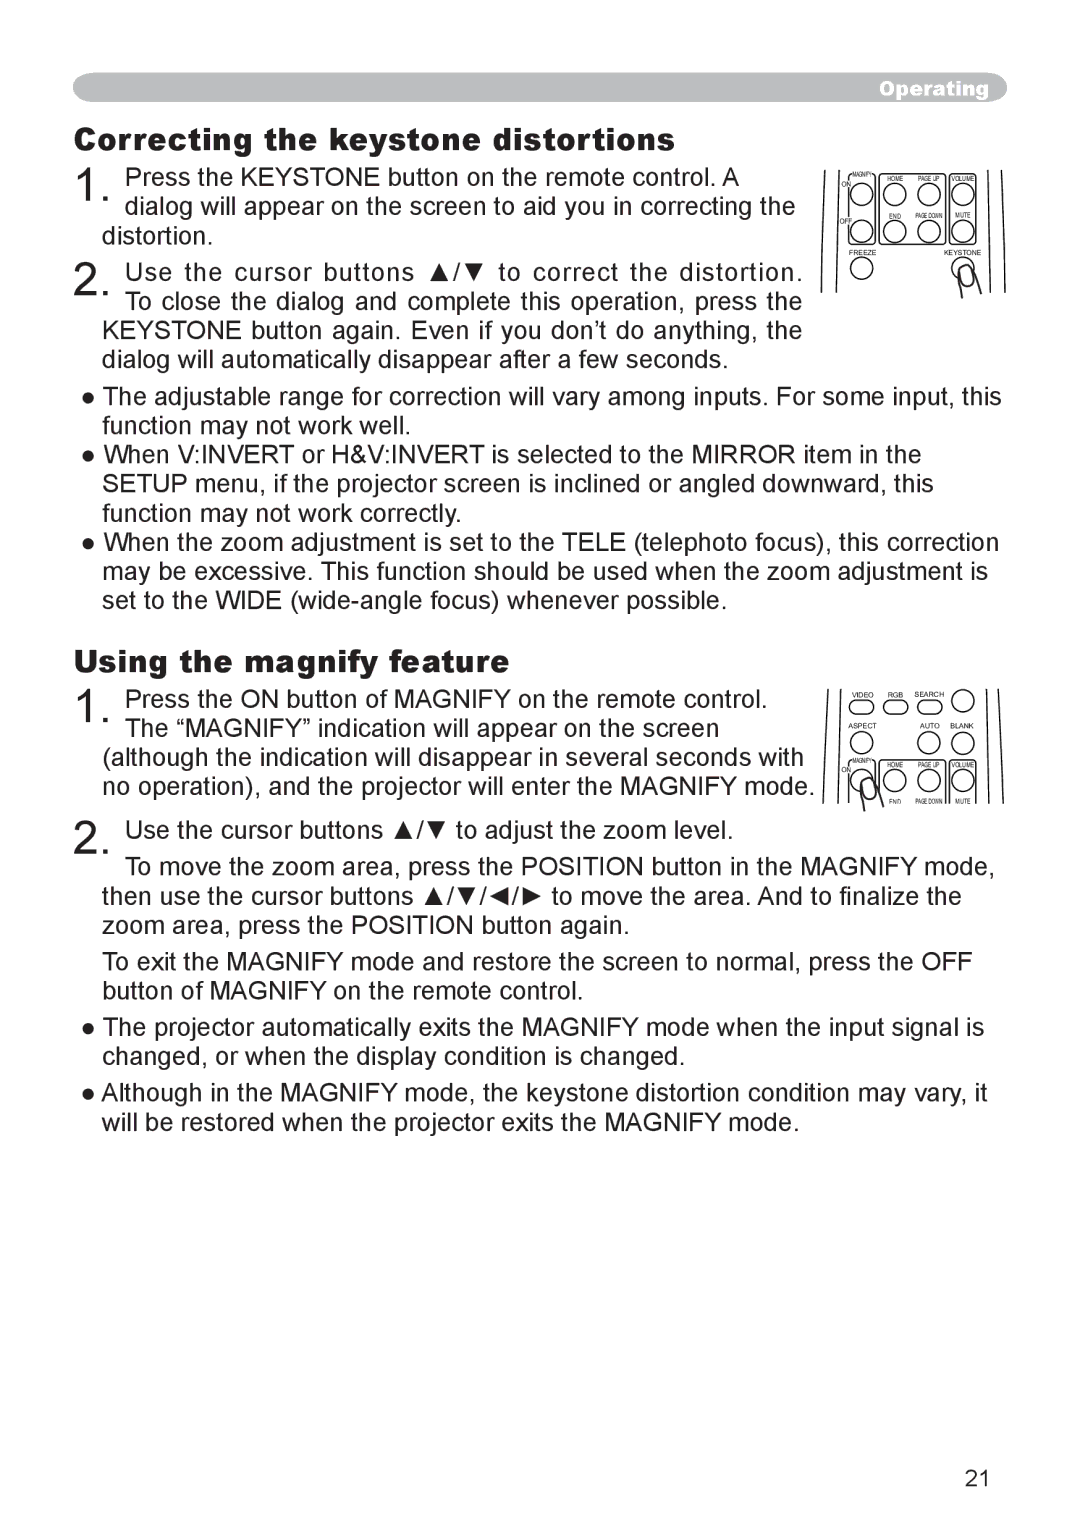 Dukane 8065, 8755D-RJ user manual Correcting the keystone distortions, Using the magnify feature 